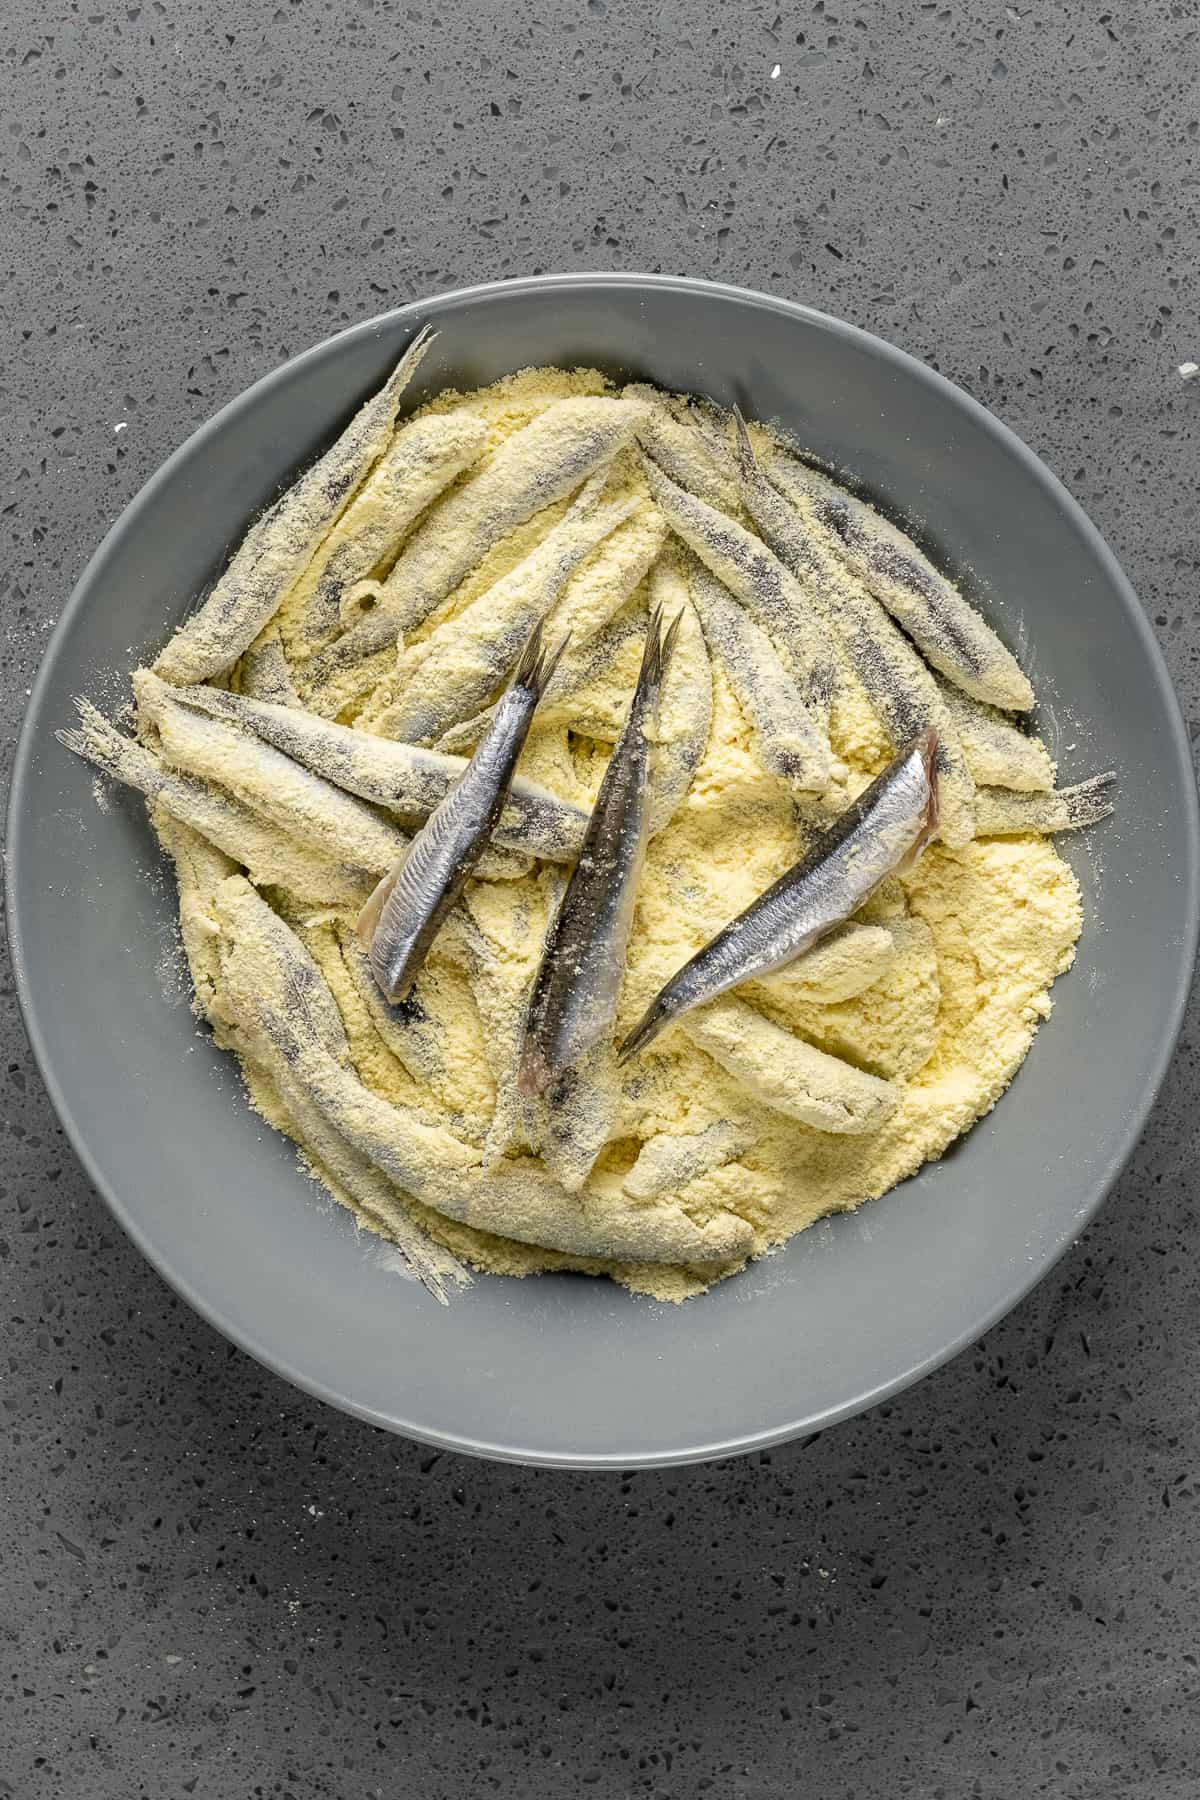 Fresh anchovies coated with cornmeal in a bowl.